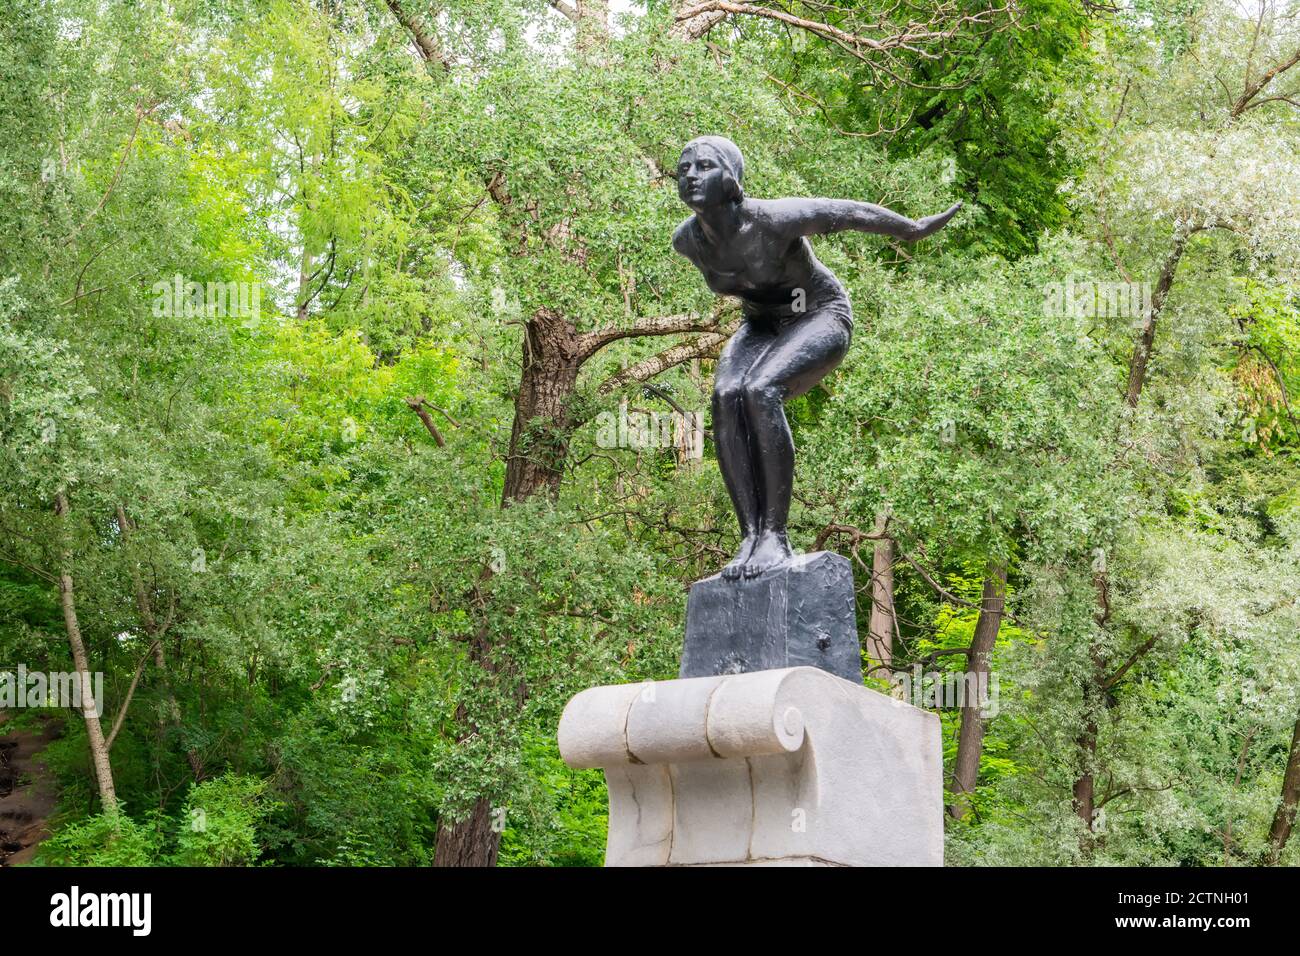 Moscow, Russia – July 4, 2017. Diver sculpture in Vorobyovy Gory nature preserve in Moscow, Russia. The sculpture is by R. Iodko and dates from 1937. Stock Photo